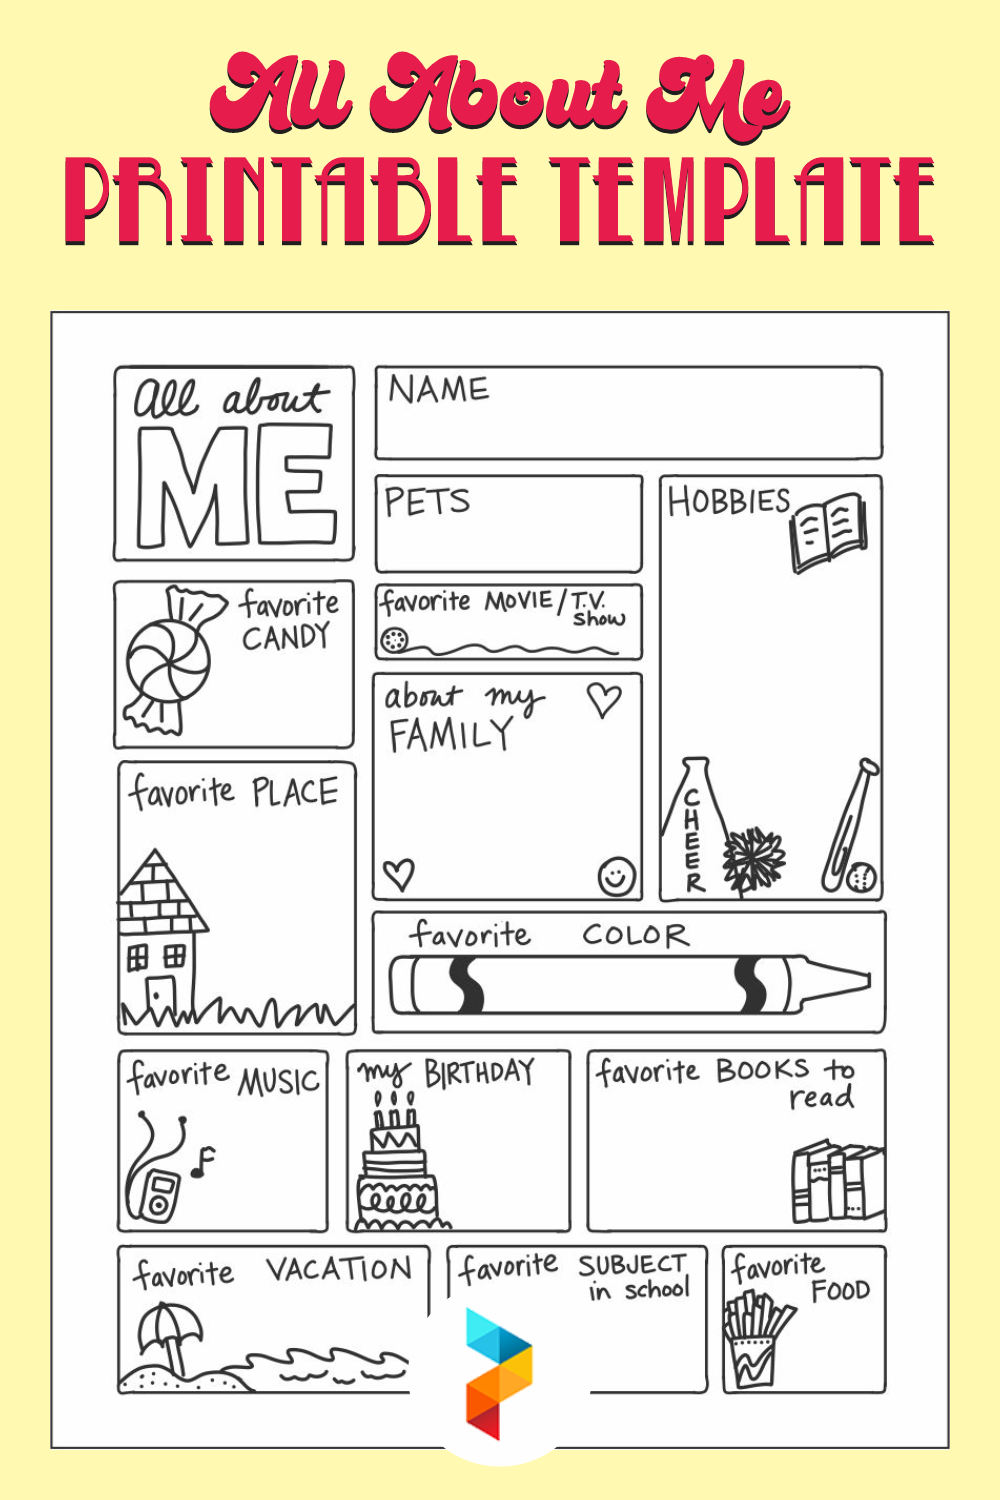 10-best-all-about-me-printable-template-printablee